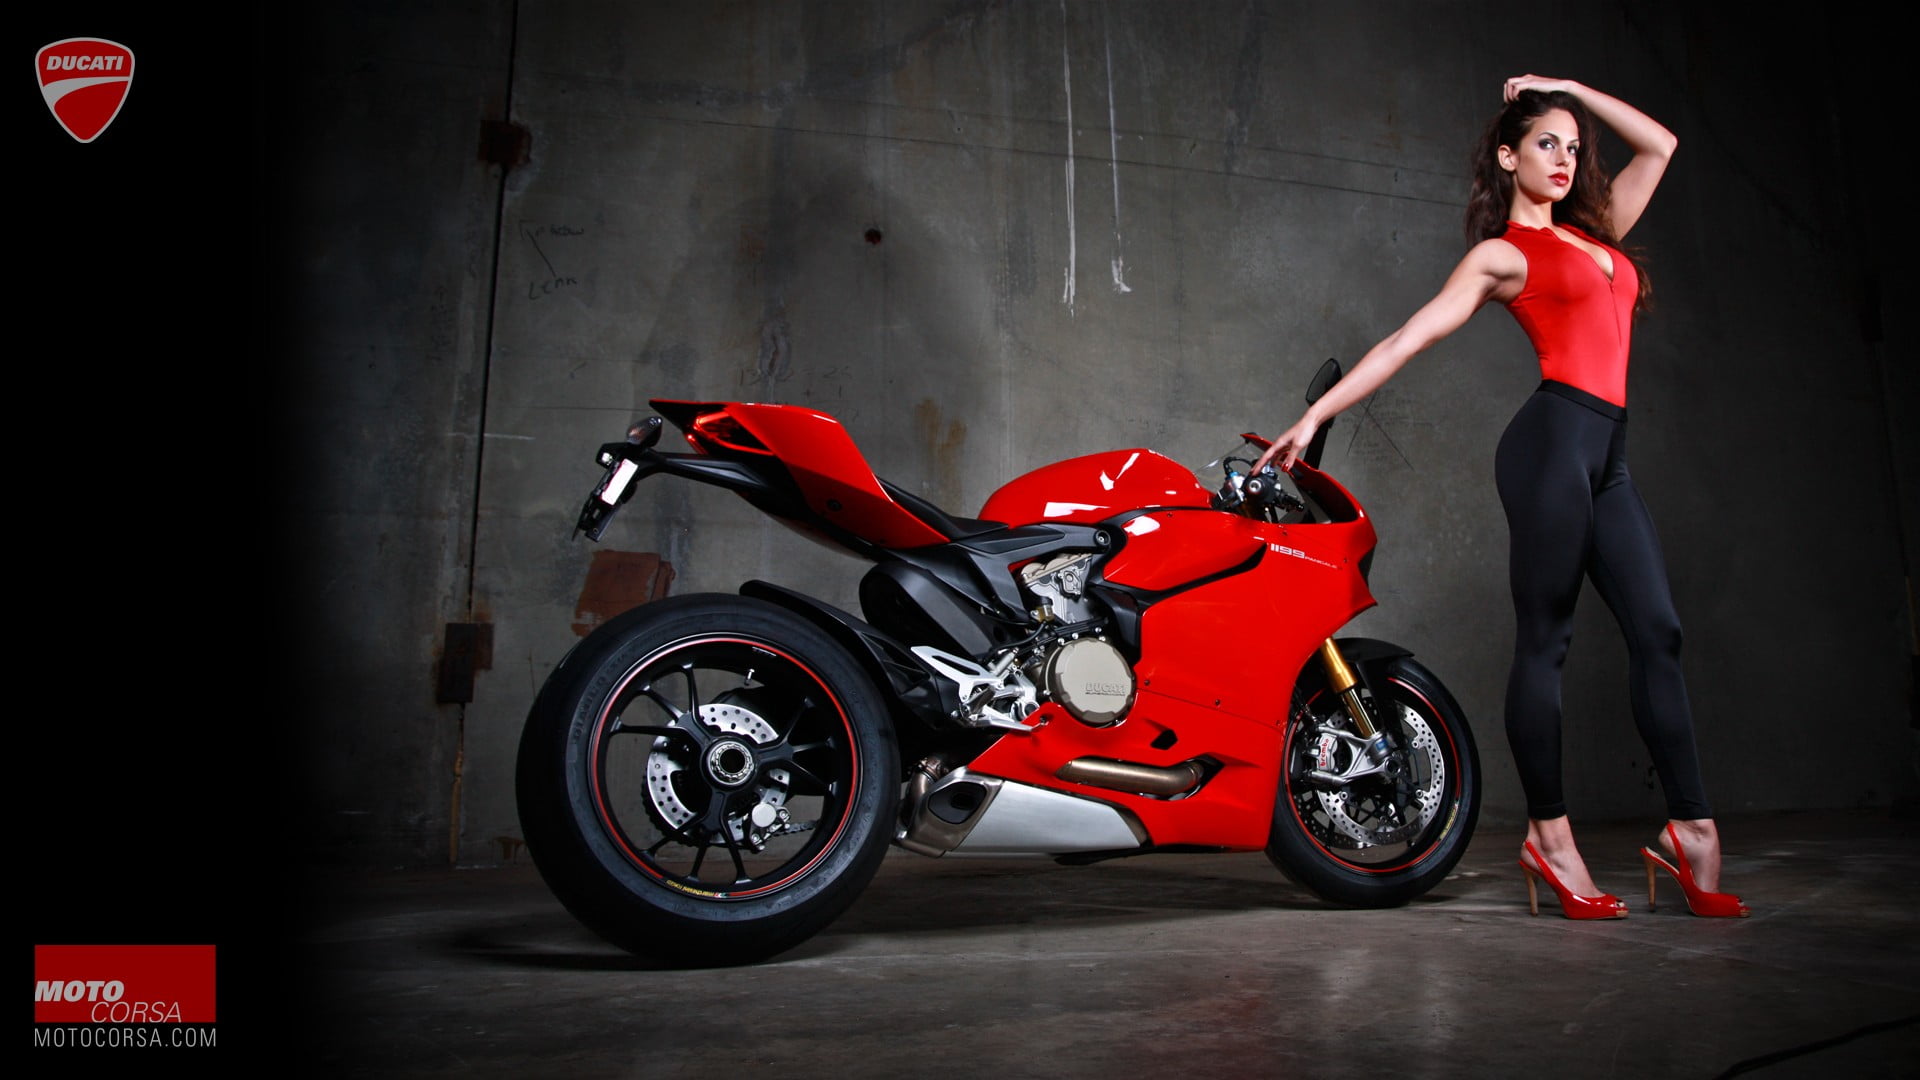 women with bikes, Ducati 1199, motorcycle, tight clothing, high heels